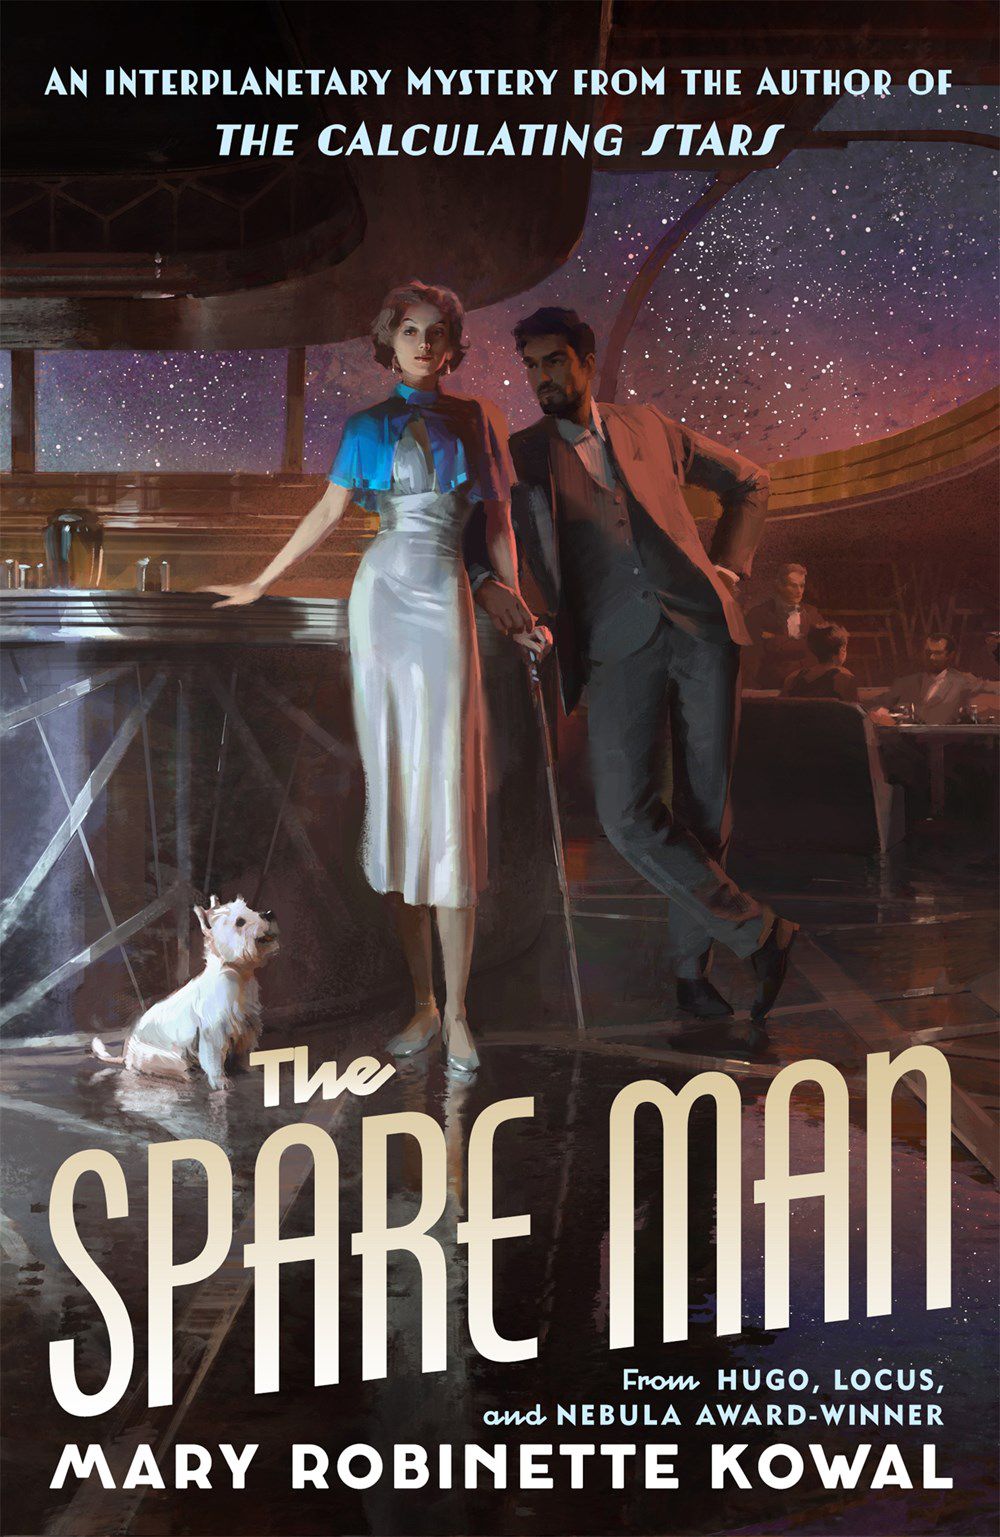 Cover image of The Spare Man by Mary Robinette Kowal, featuring two figures standing in front of a bar with a dog sitting beside them